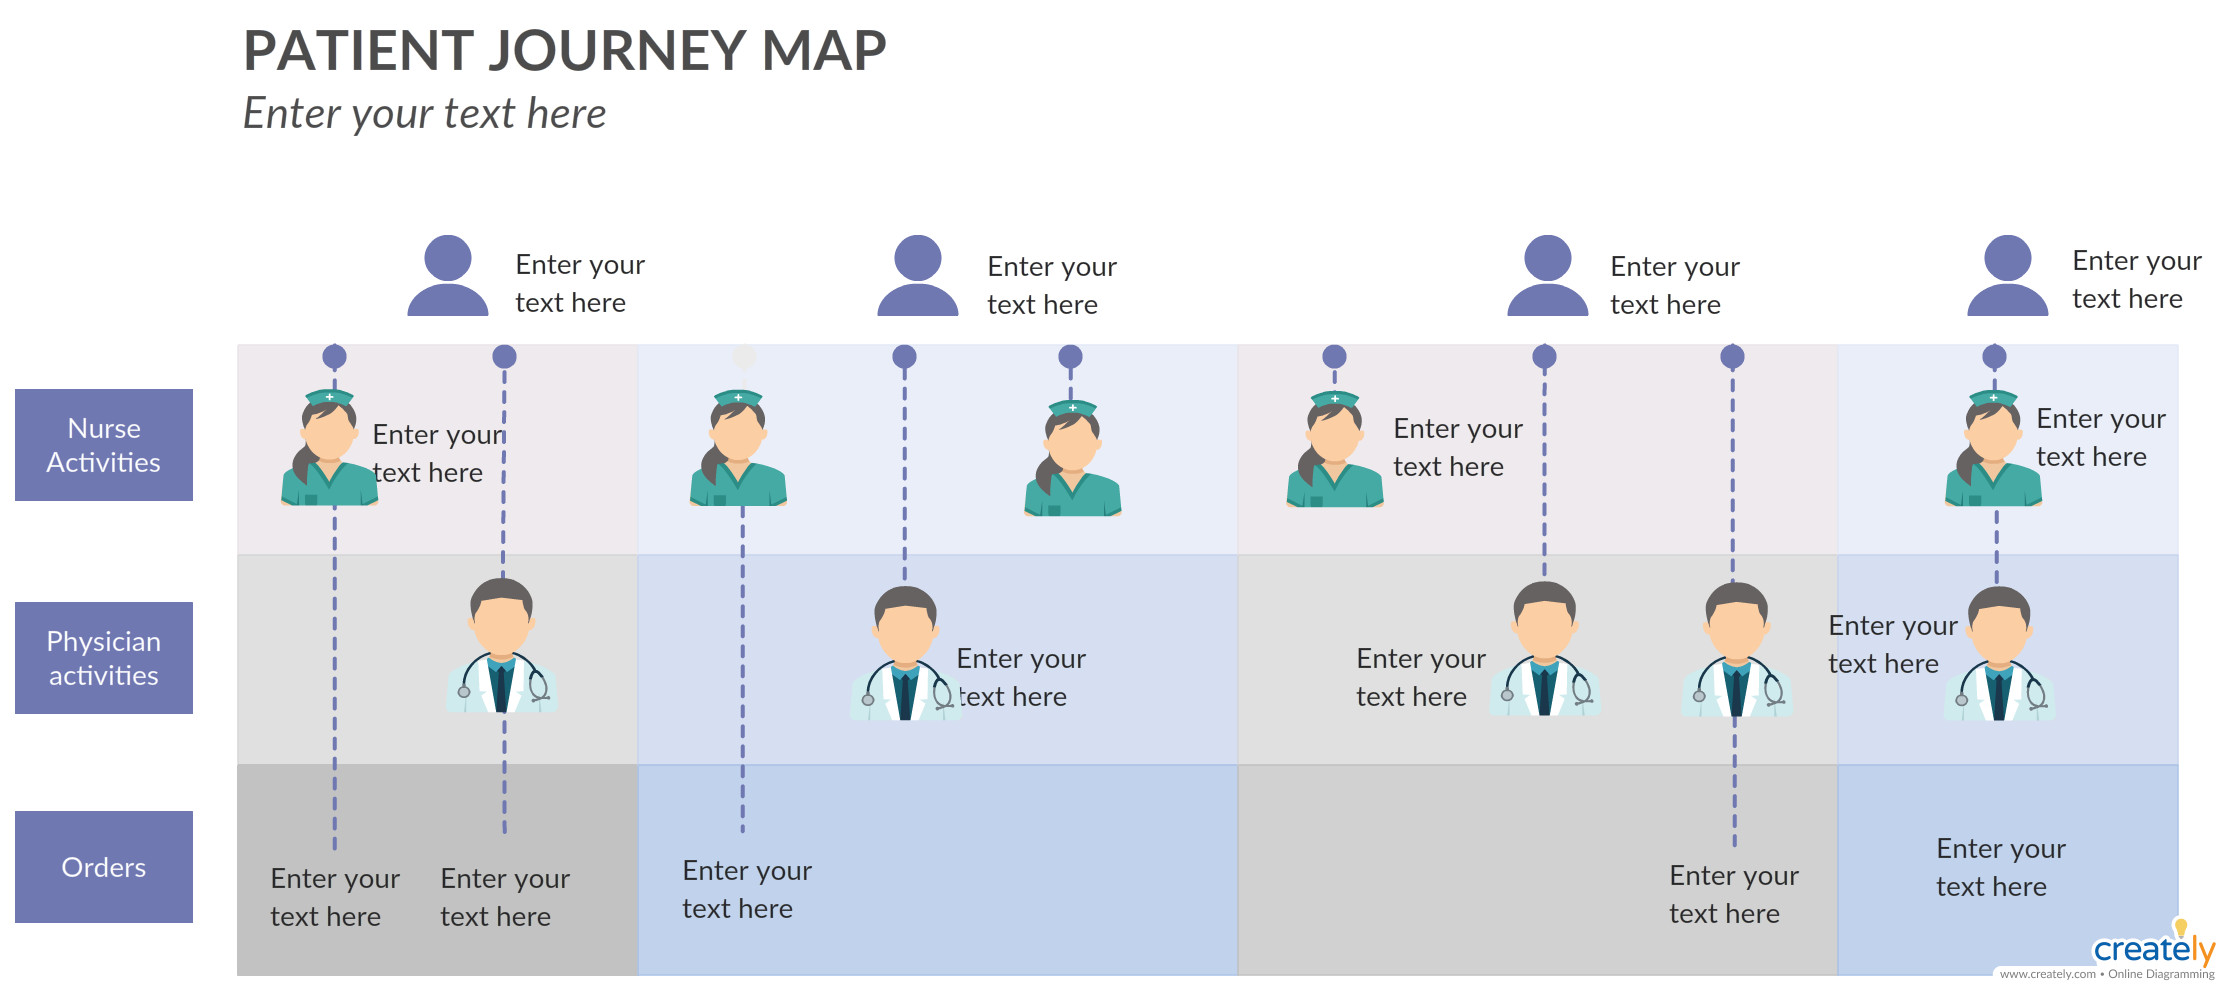 The patient journey map which outlines all of the patient